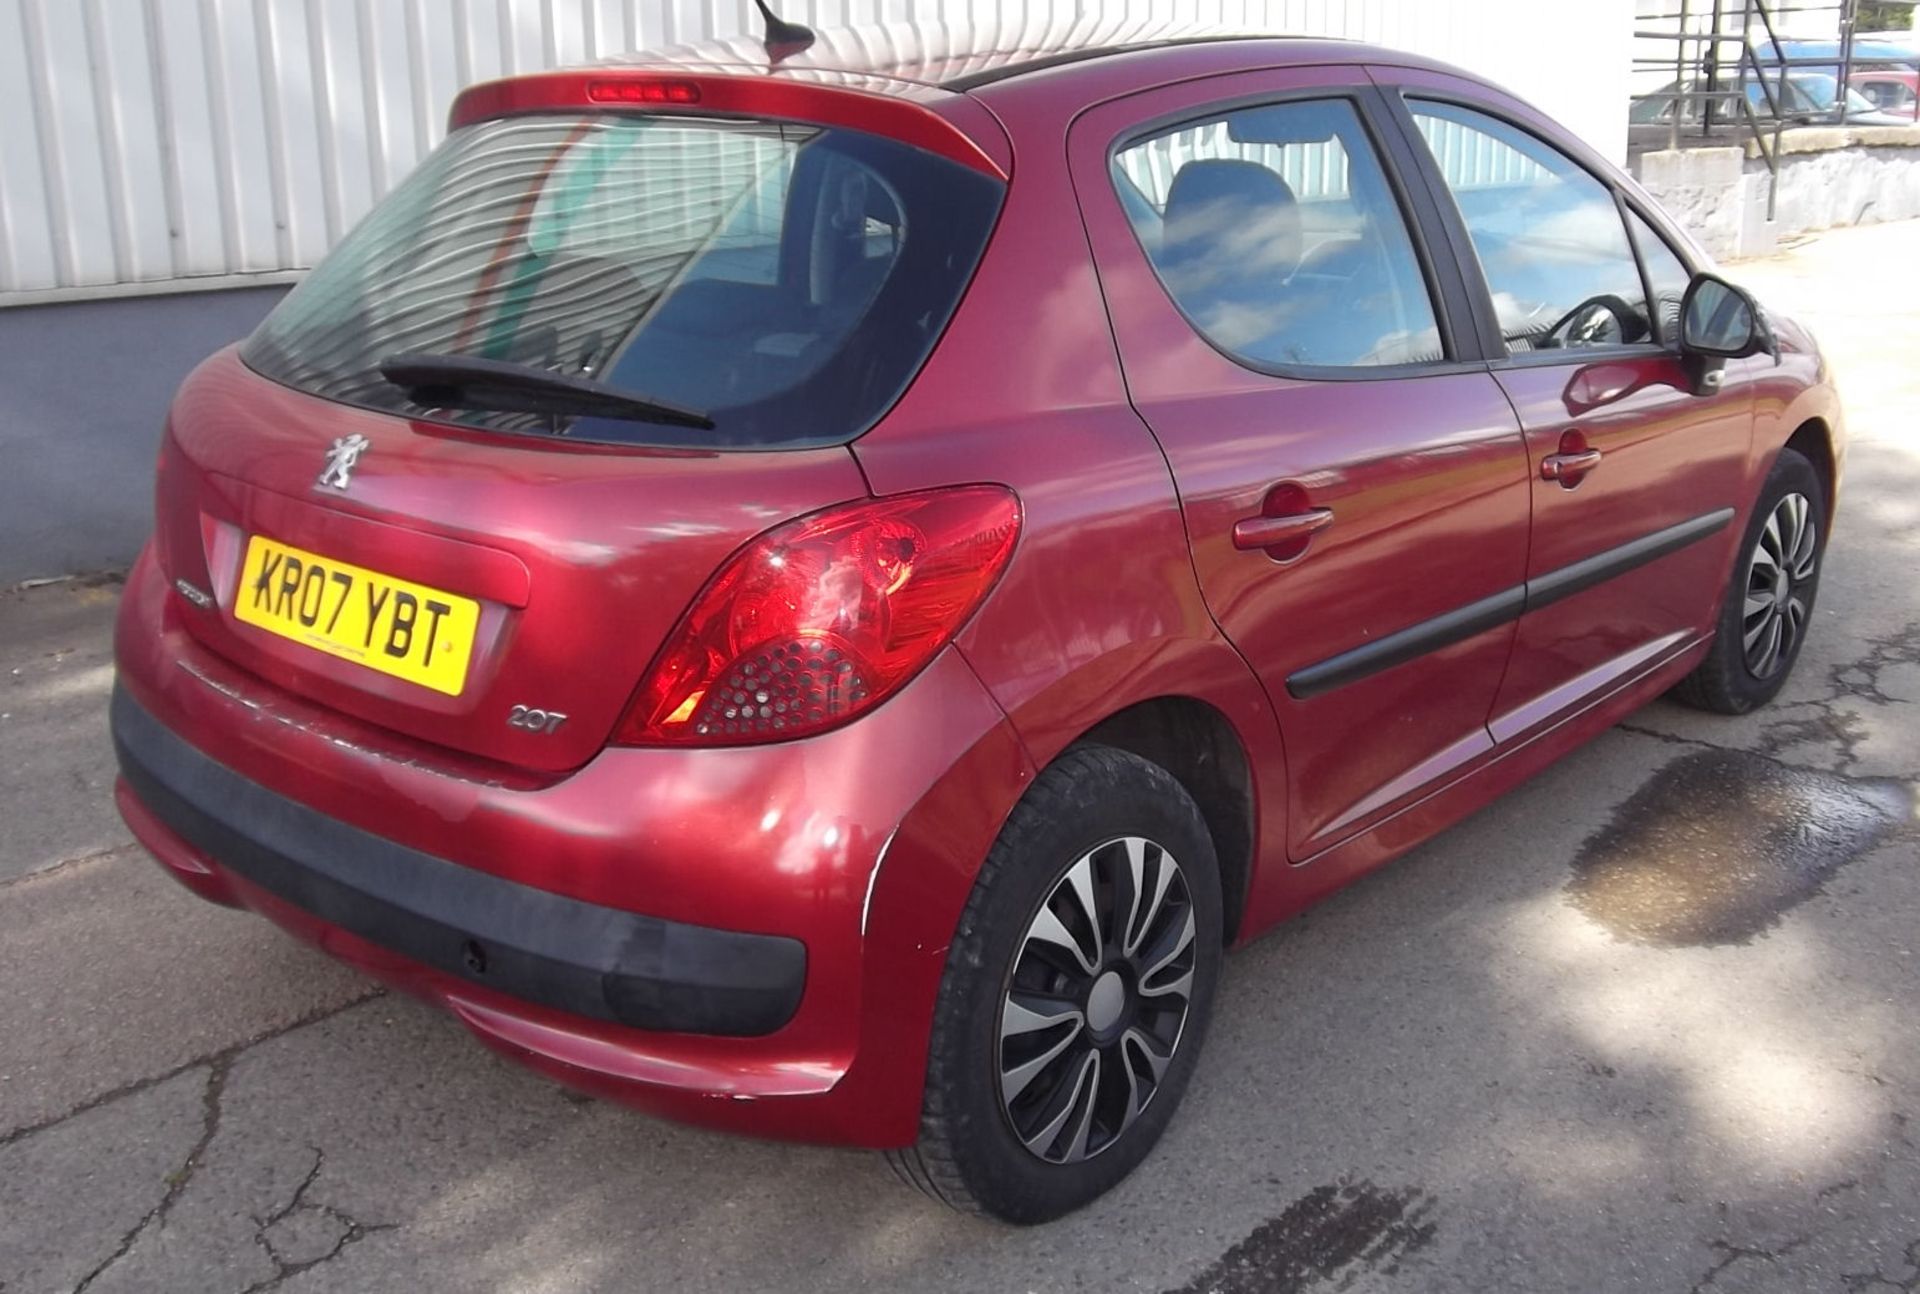 2007 Peugeot 207 1.6 HdiS 5 Door Hatchback - CL505 - NO VAT ON THE HAMMER - Location: Corby - Image 9 of 9